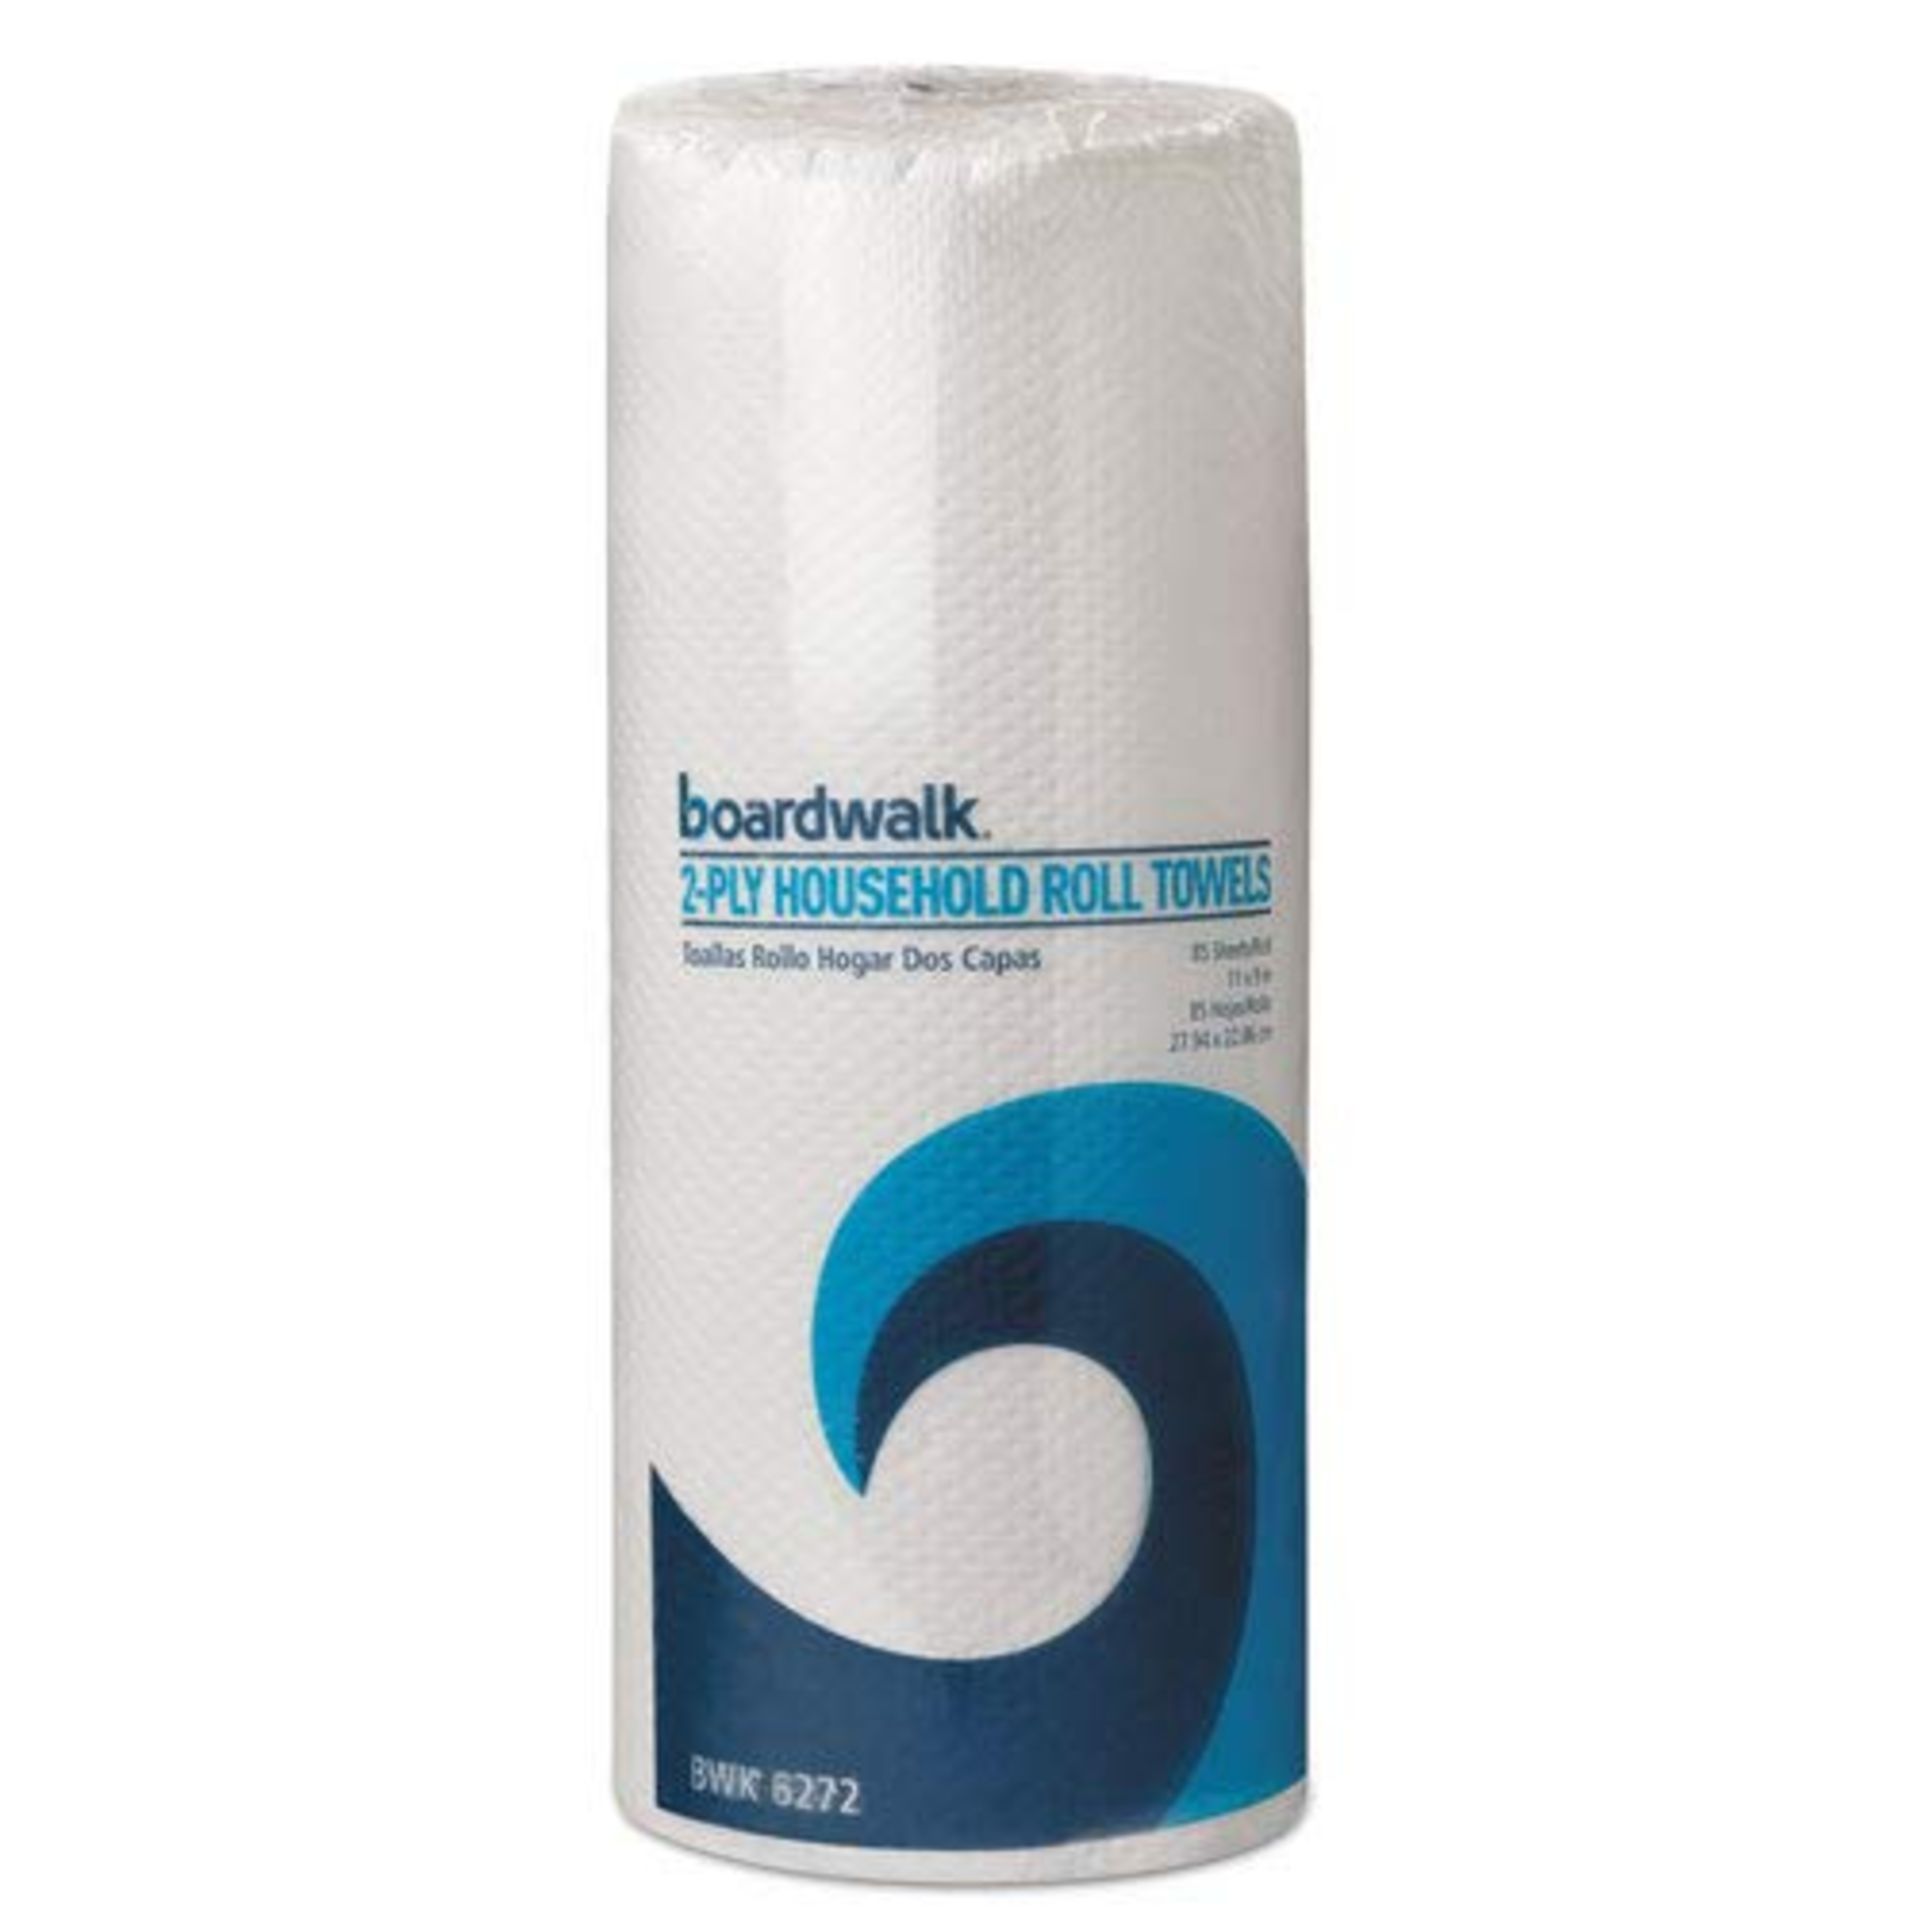 Lot of (103) Cases of Boardwalk 2-Ply Household Roll Towels